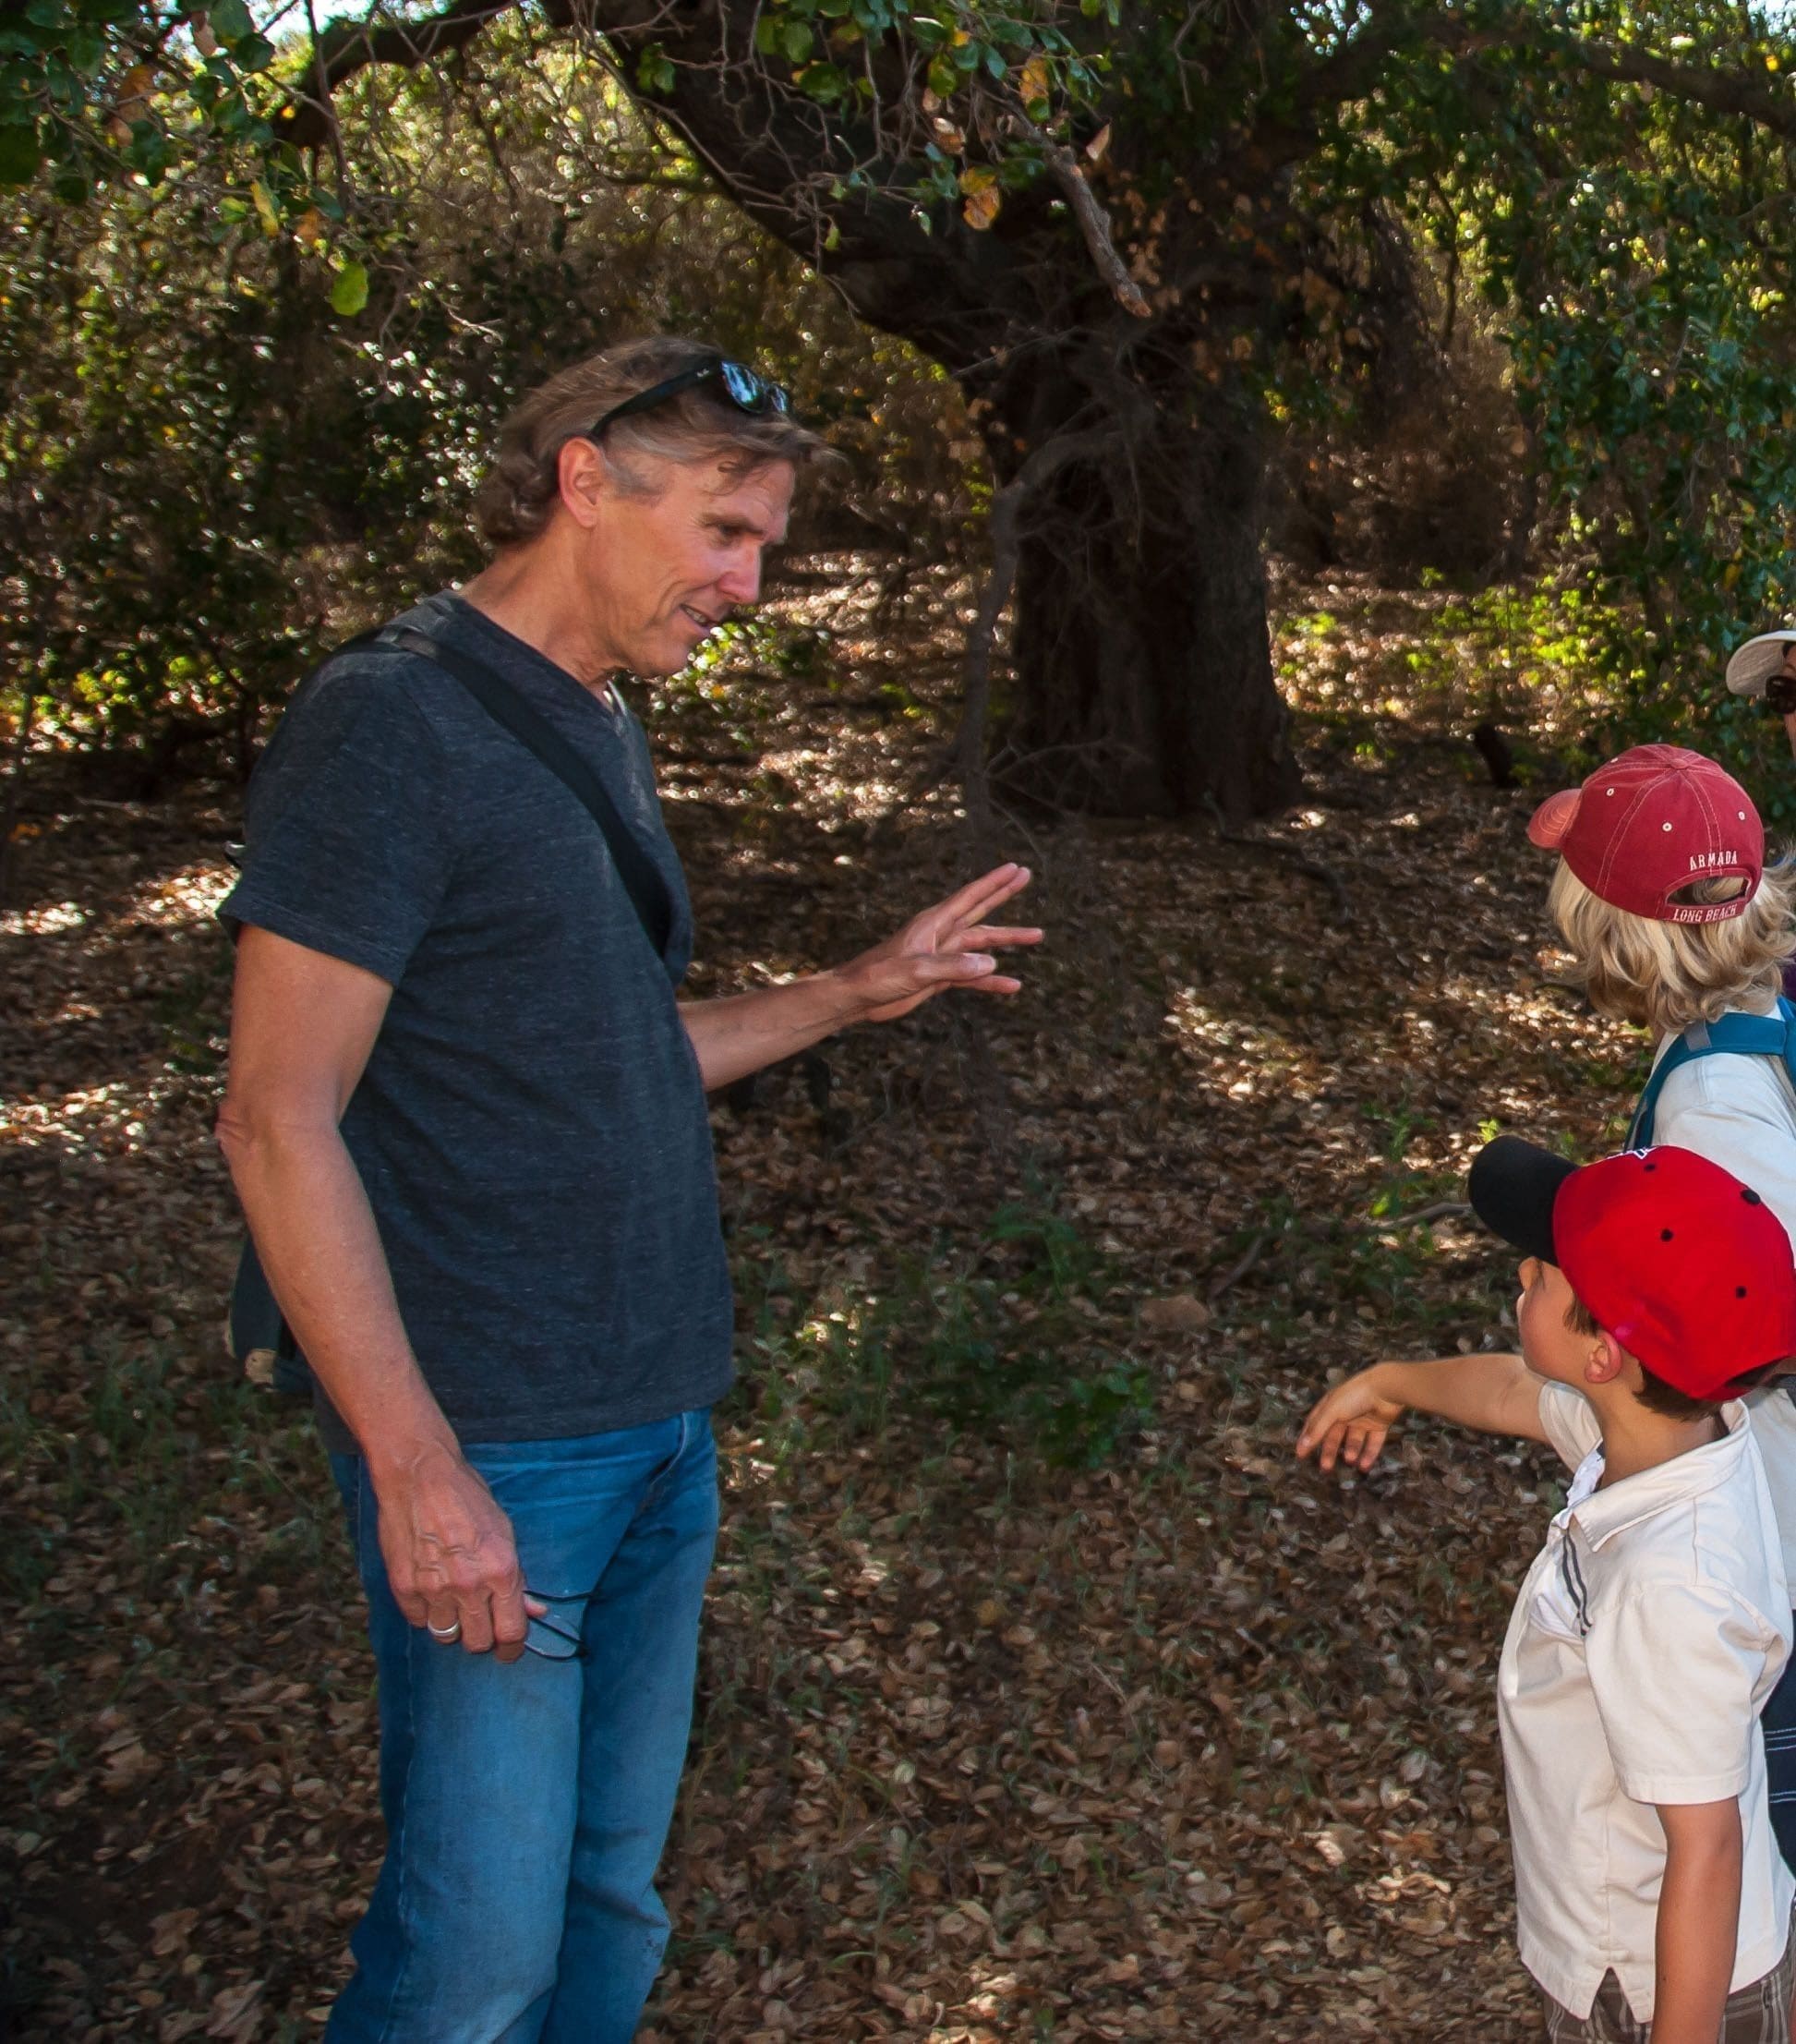 Chaparral Institute director Richard Halsey in the field with young students